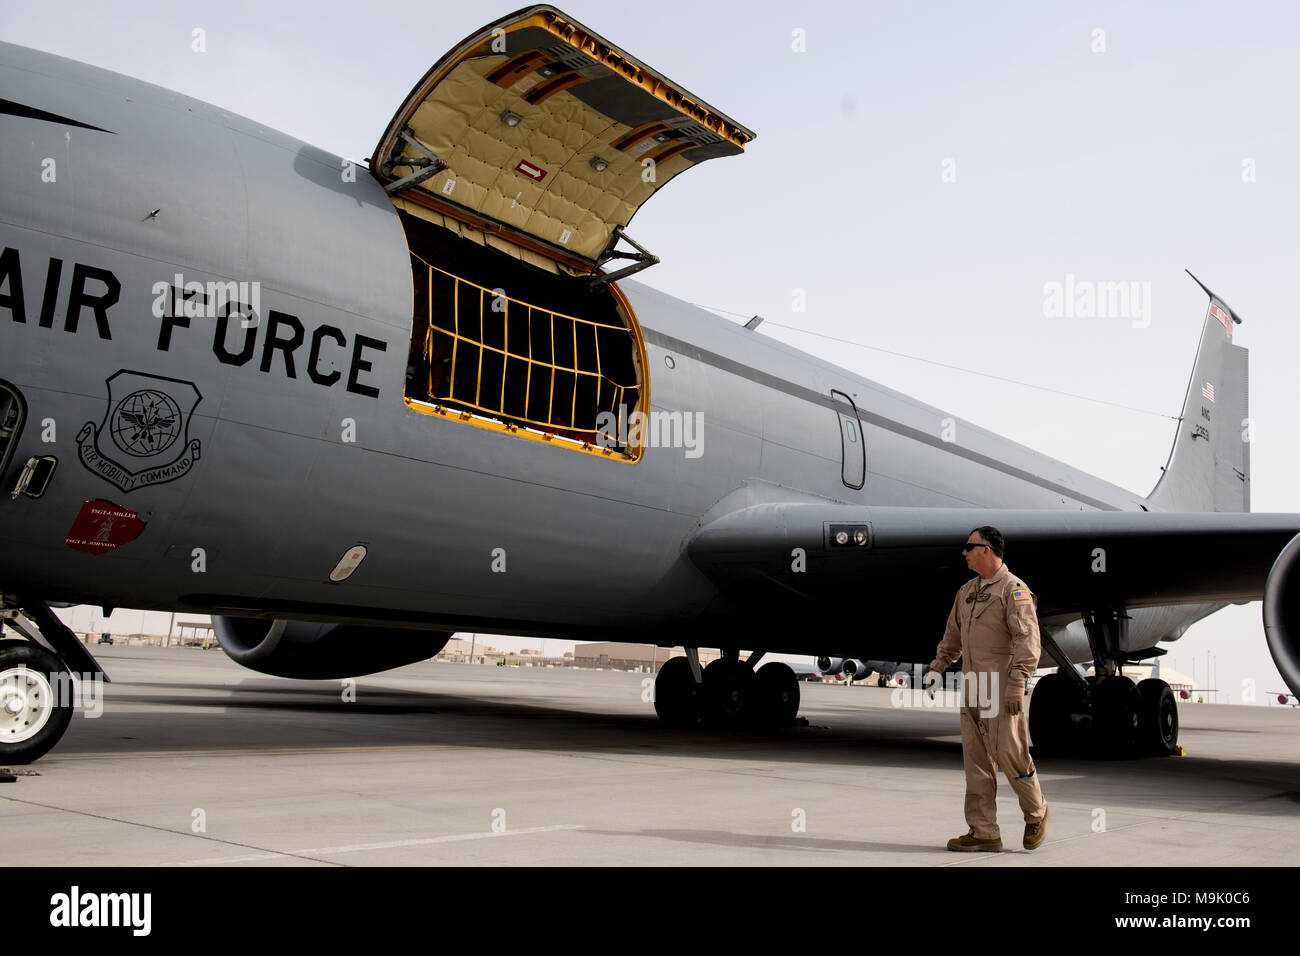 A U.S. Air Force KC-135 Stratotanker pilot assigned to the 340th Expeditionary Air Refueling Squadron conducts a walk-around inspection on his aircraft on Al Udeid Air Base, Qatar, March 16, 2018. The 340th EARS is assigned to the 379th Expeditionary Operations Group and supports various operations in countries such as Iraq, Syria and Afghanistan. (U.S. Air Force Photo by Tech. Sgt. Paul Labbe) Stock Photo